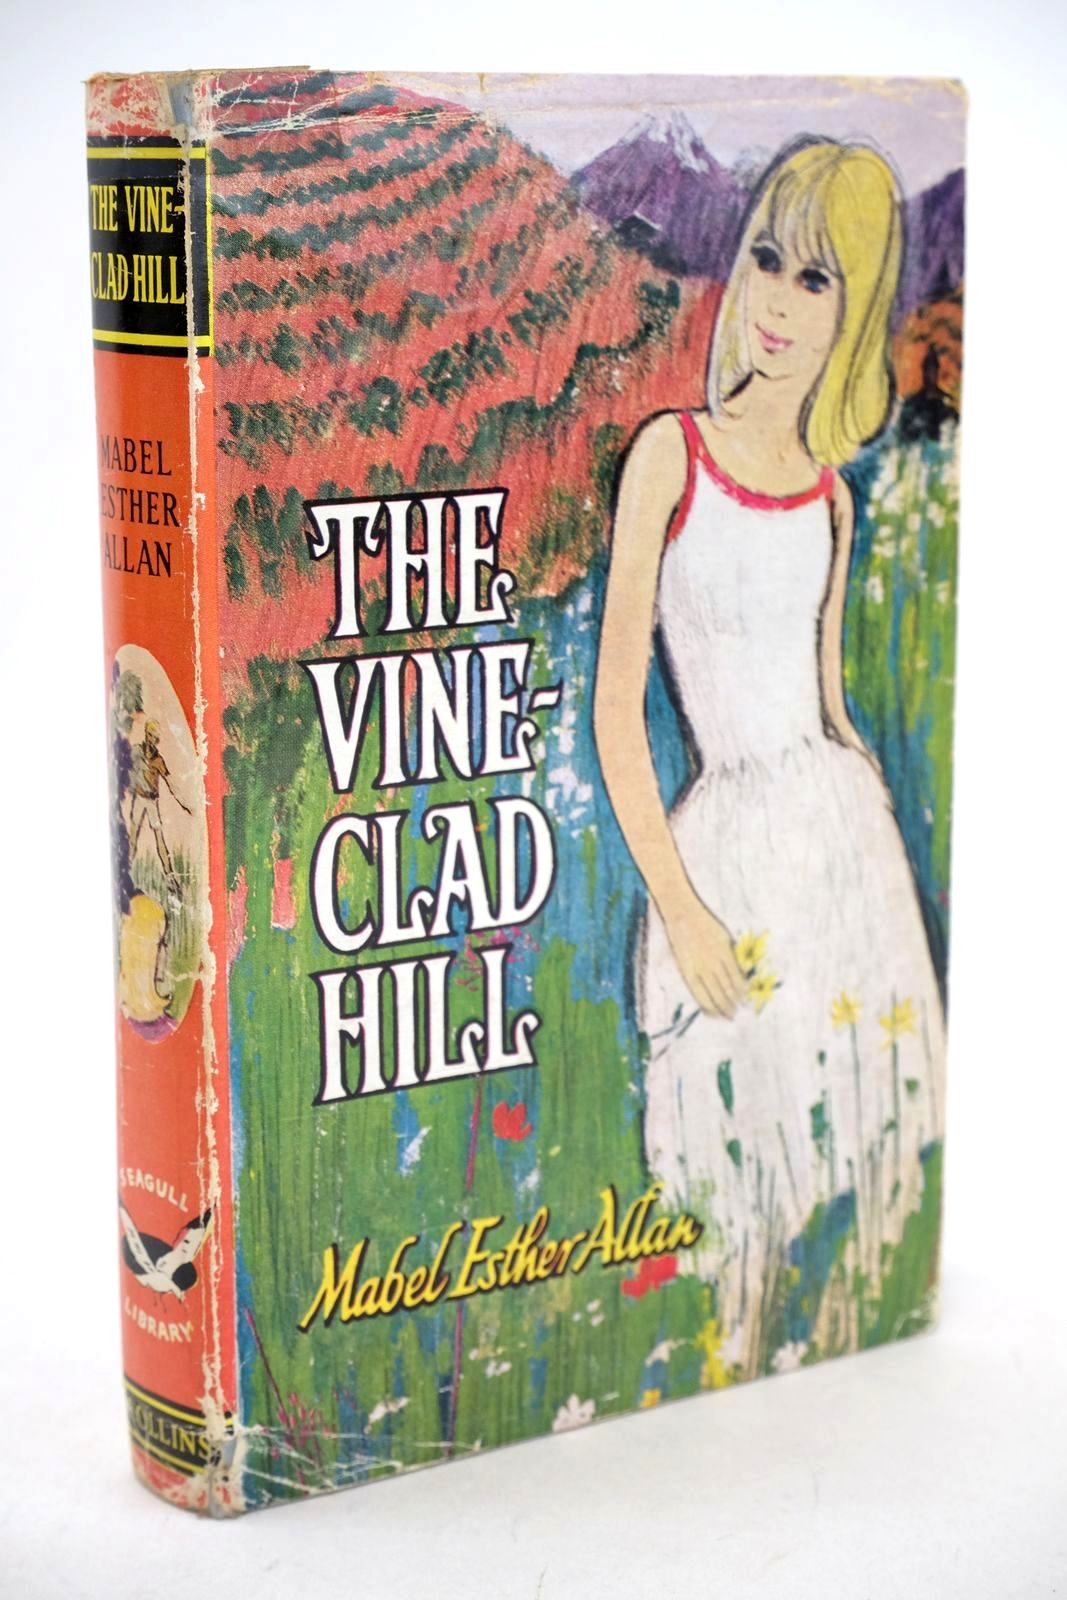 Photo of THE VINE-CLAD HILL written by Allan, Mabel Esther published by Collins (STOCK CODE: 1326887)  for sale by Stella & Rose's Books